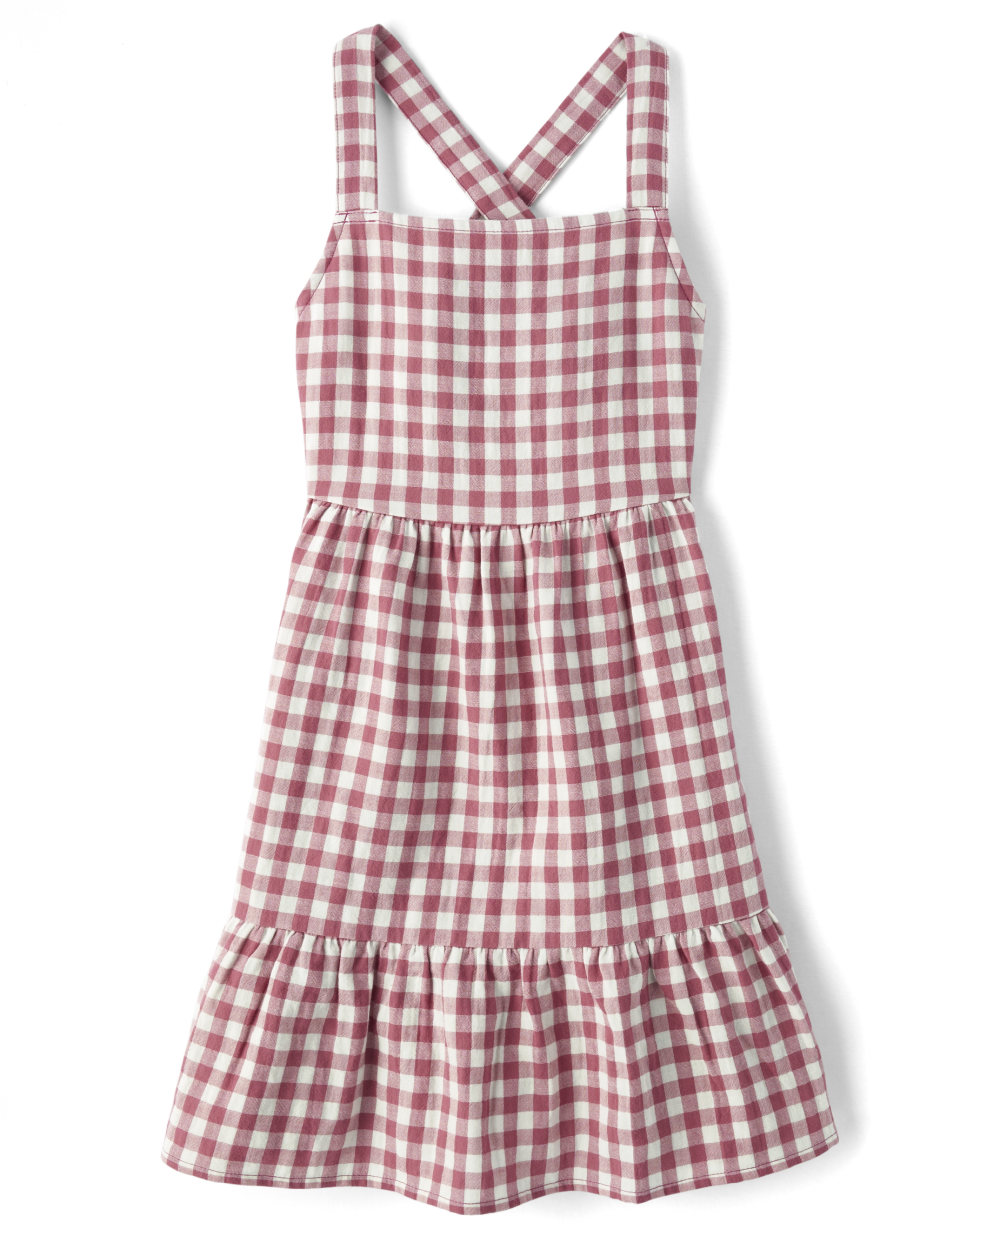 Girls Square Neck Checkered Gingham Print Sleeveless Above the Knee Dress With Ruffles